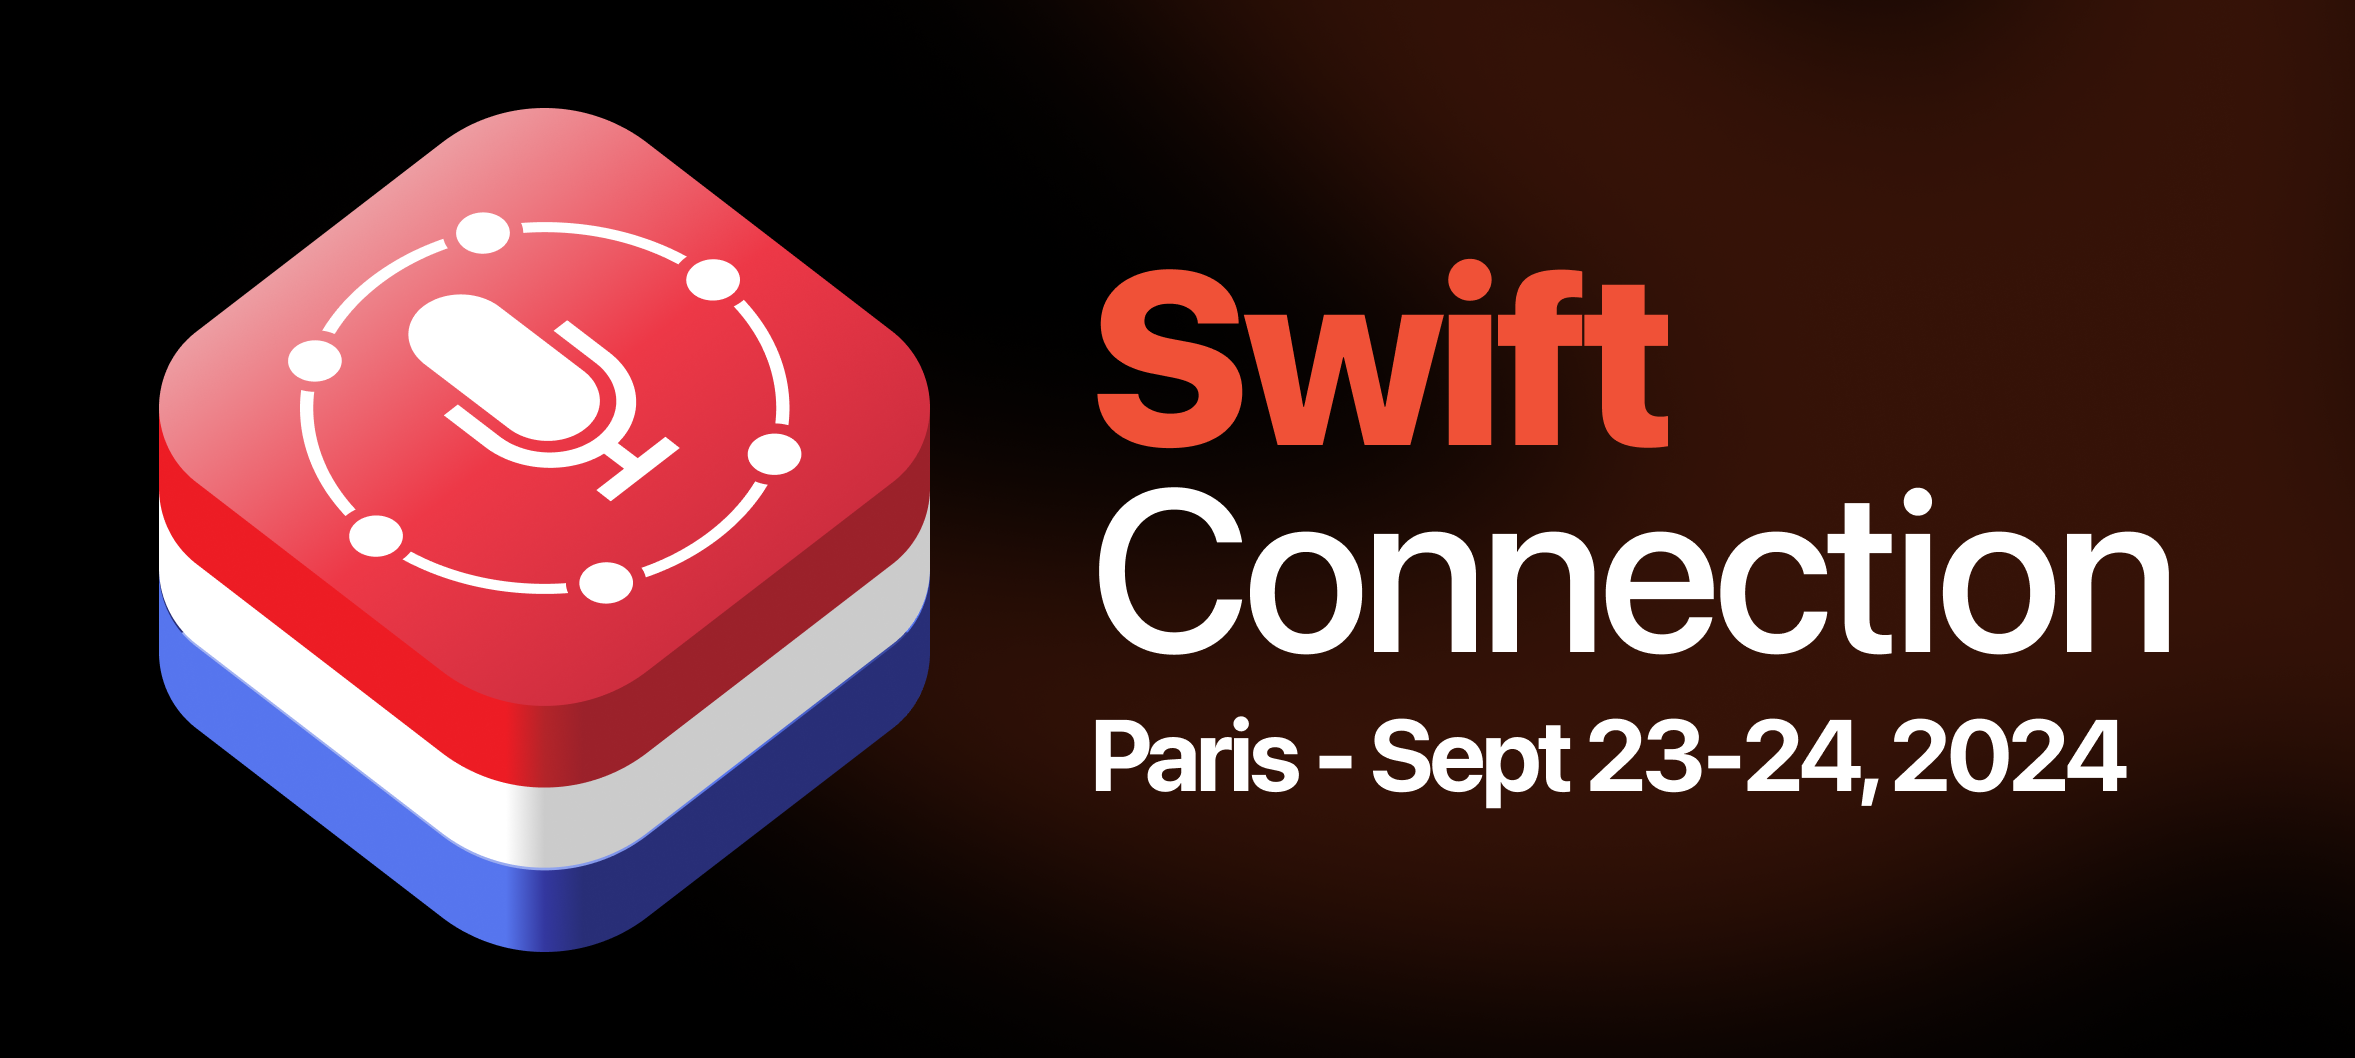 Swift Connection